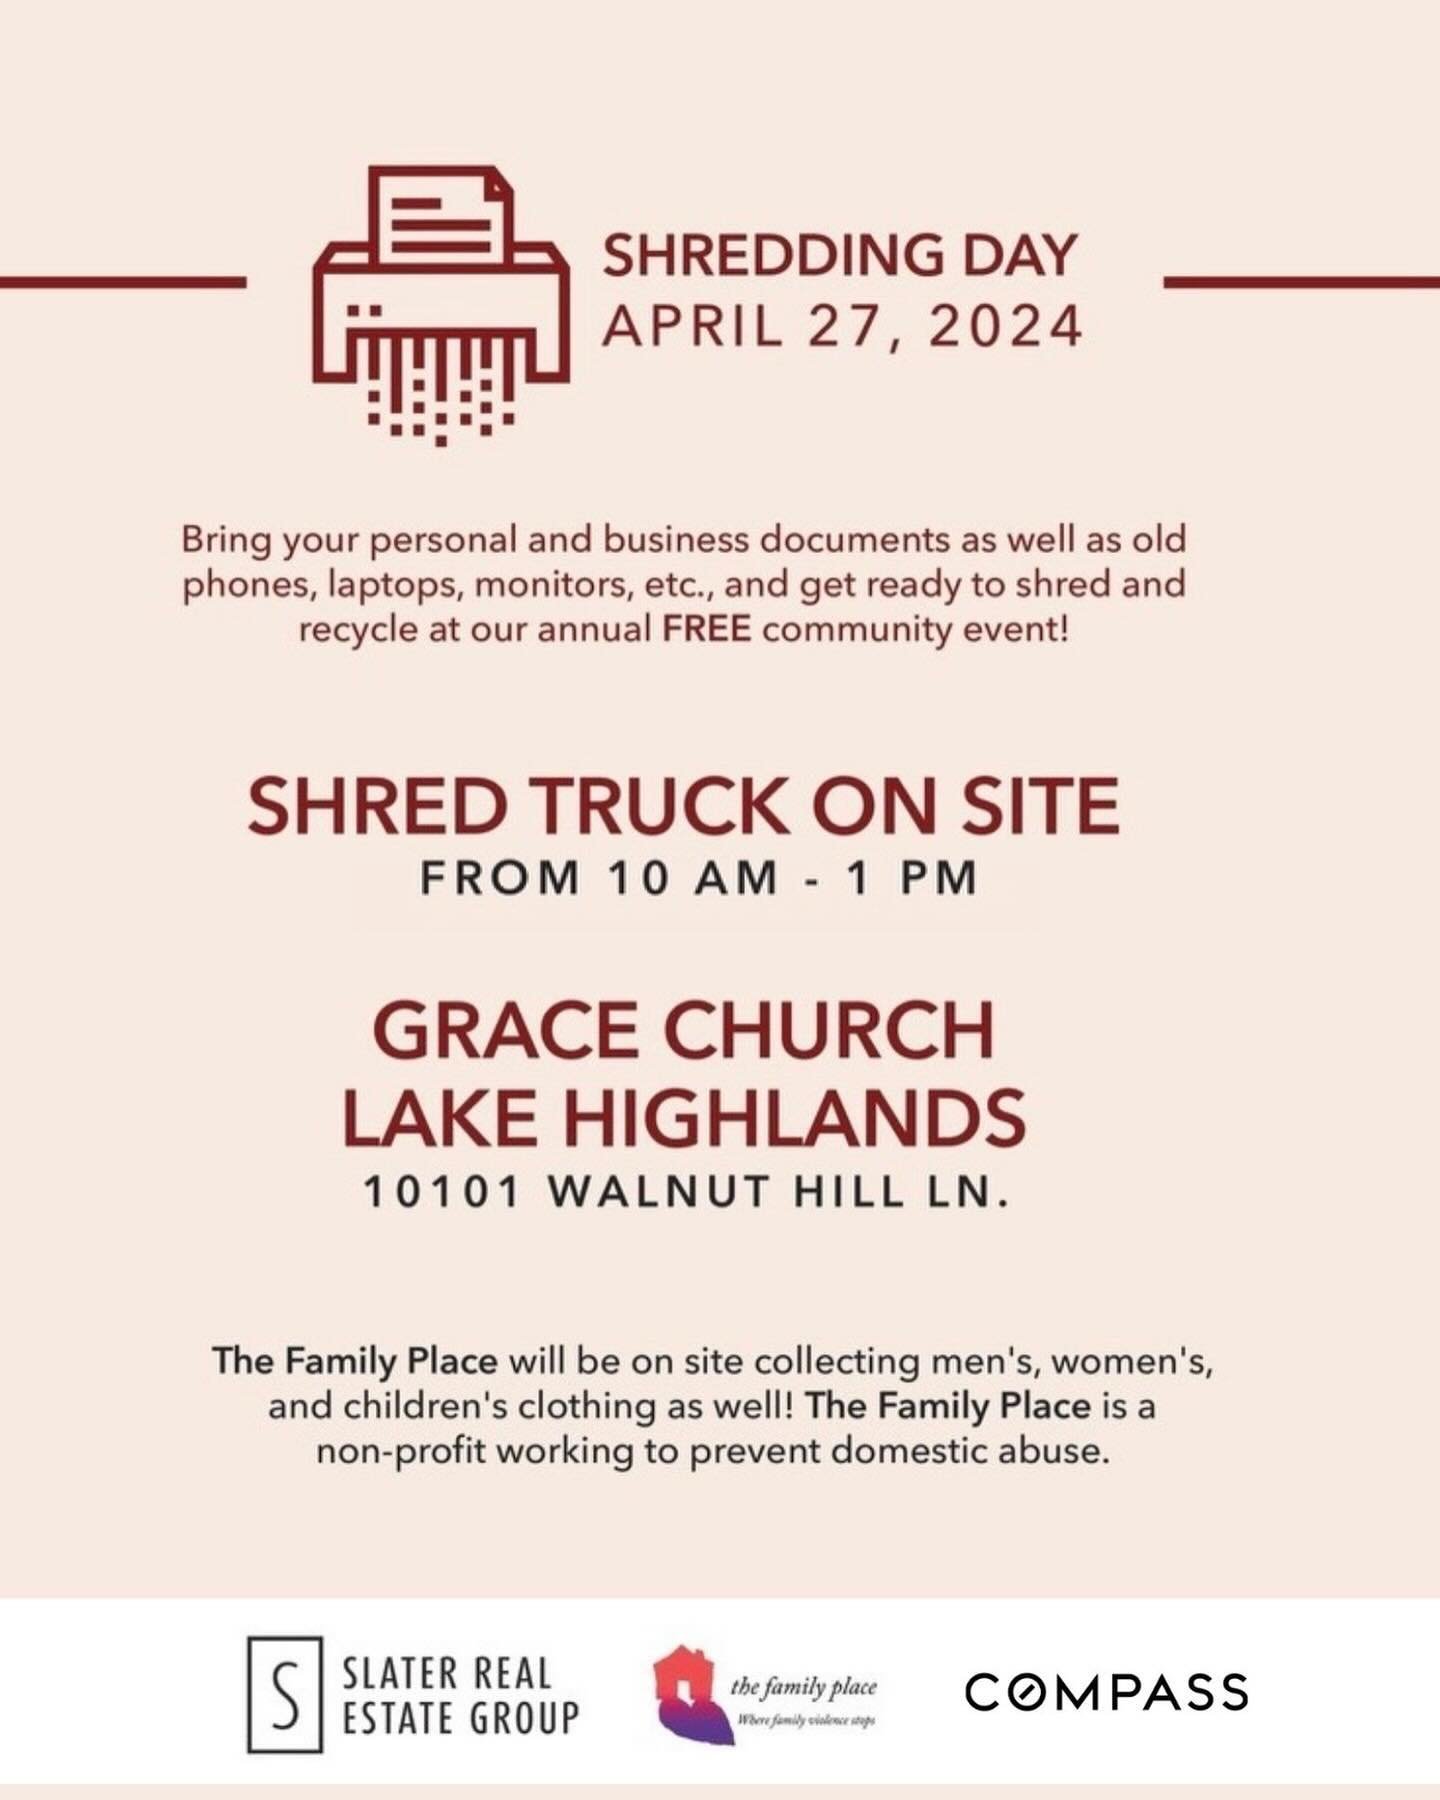 Tomorrow is the day! 🙌🎉🗓️ The FREE Community Shred Event hosted by The Slater Real Estate Group will be happening &ldquo;rain or shine!&rdquo; 😎☔️ Bring your papers, electronics and clothes to donate to The Family Place and all trucks will be on 